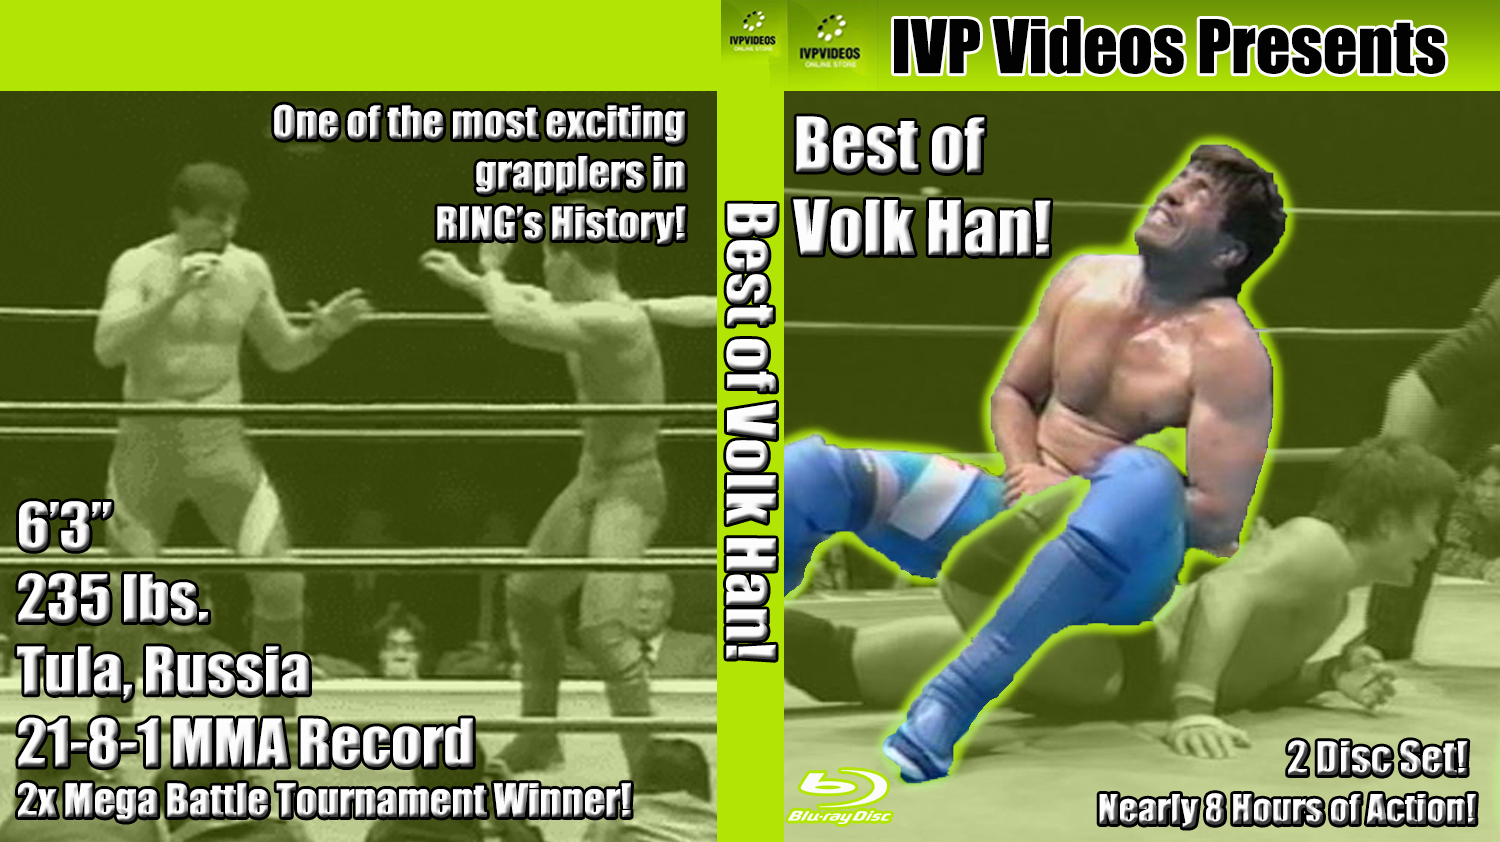 Best of Volk Han (2 Disc Blu-Ray with Cover Art)